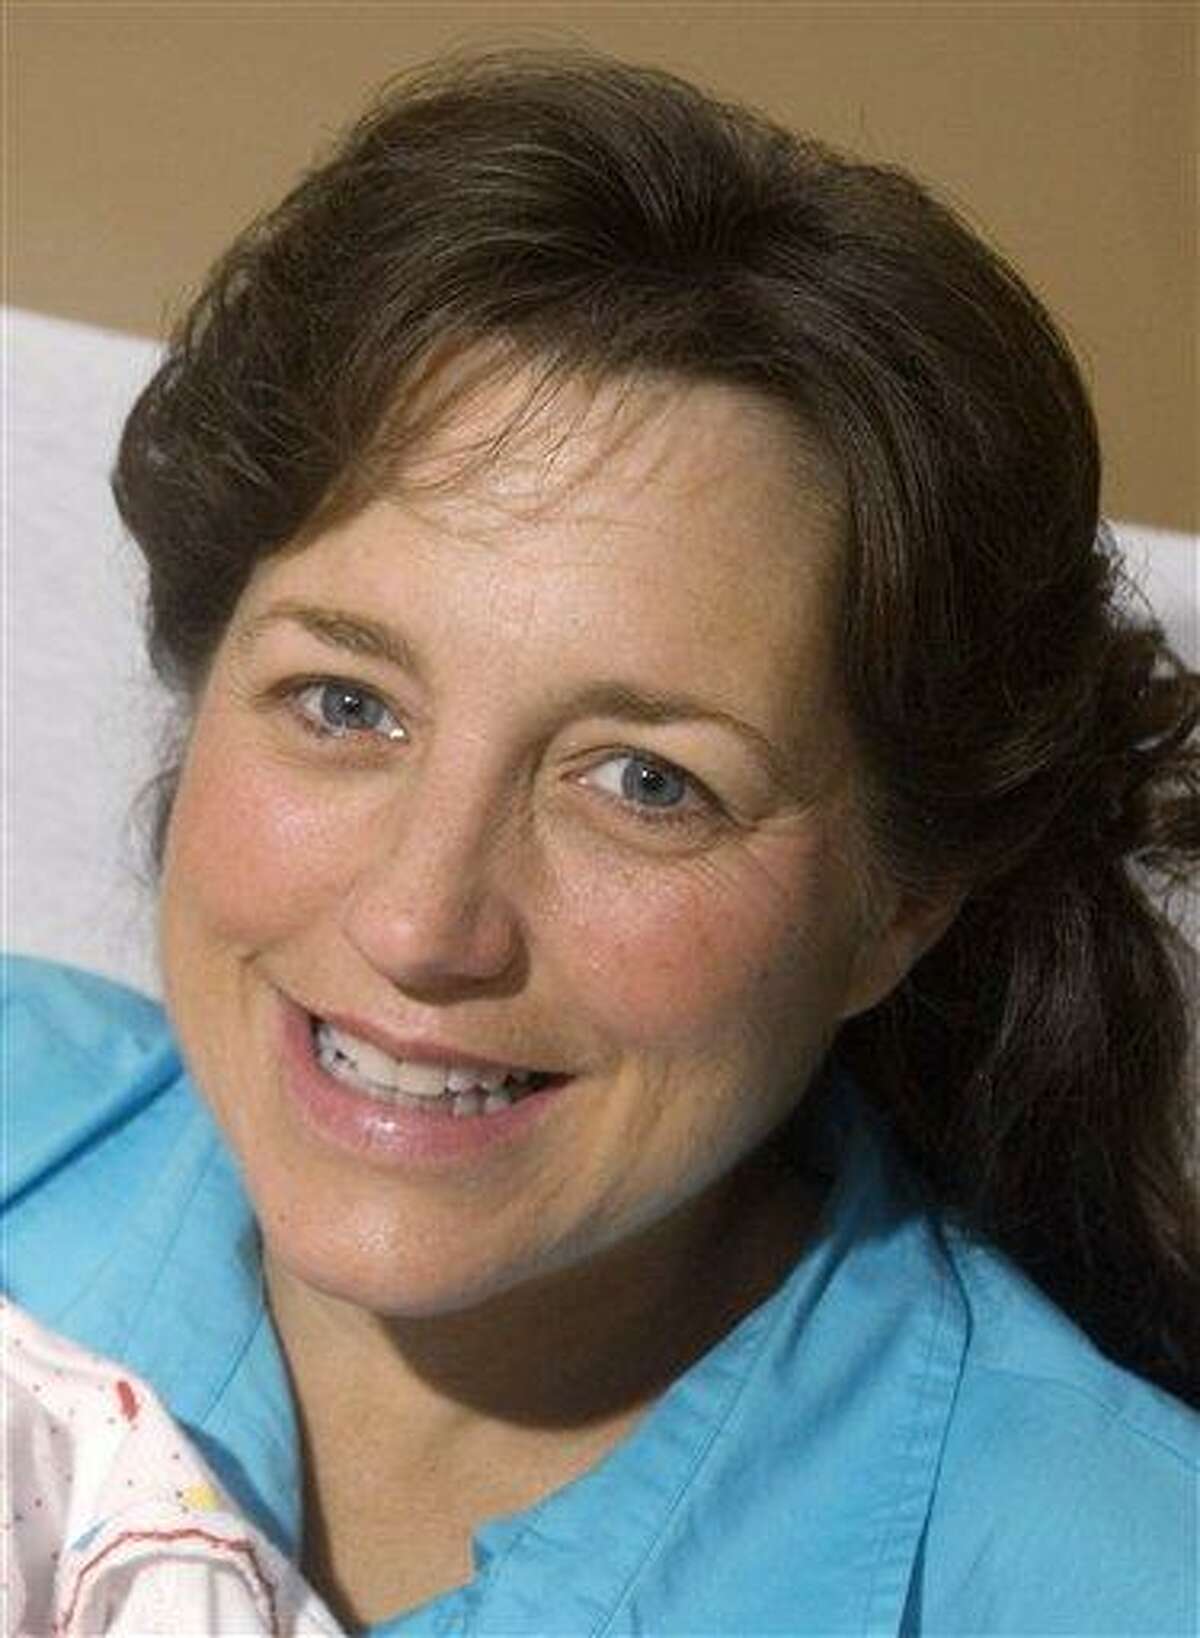 In this Dec. 19, 2008 file picture, Michelle Duggar is shown in Rogers, Ark. Duggar, who stars on the TLC reality show "19 Kids and Counting," has suffered a miscarriage after announcing she was expecting her 20th child. Associated Press